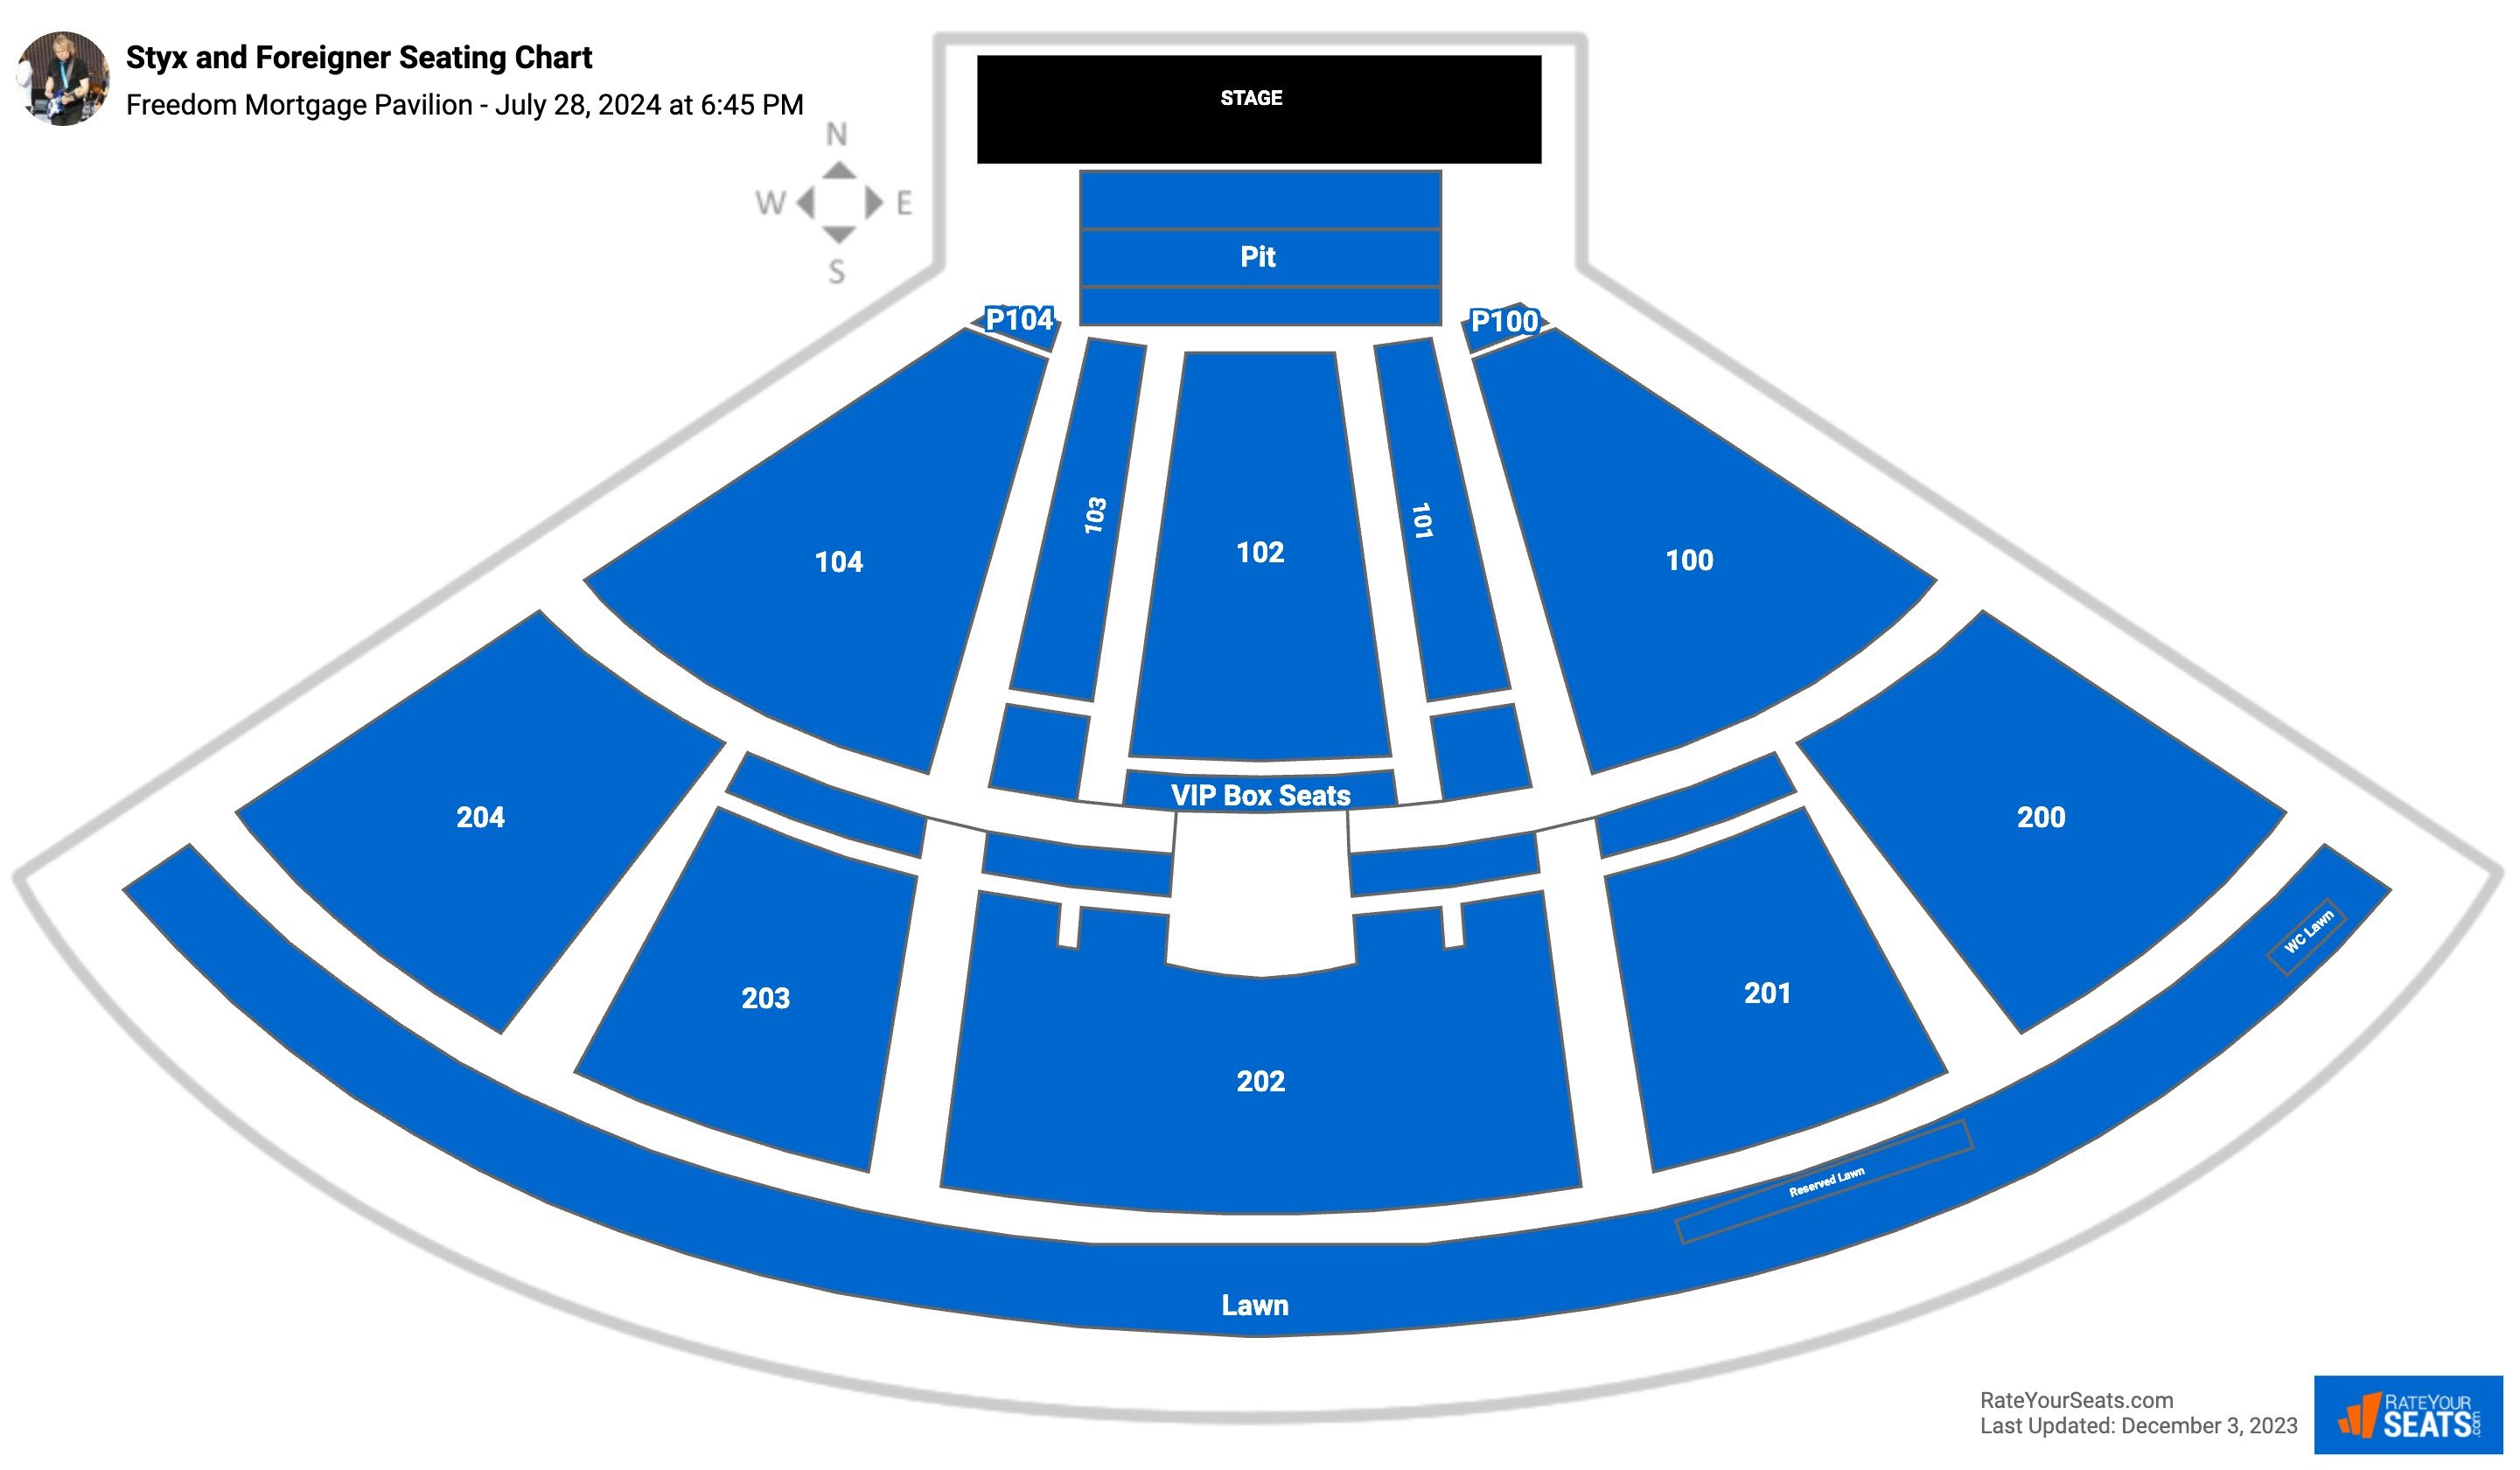 Styx and Foreigner seating chart Freedom Mortgage Pavilion